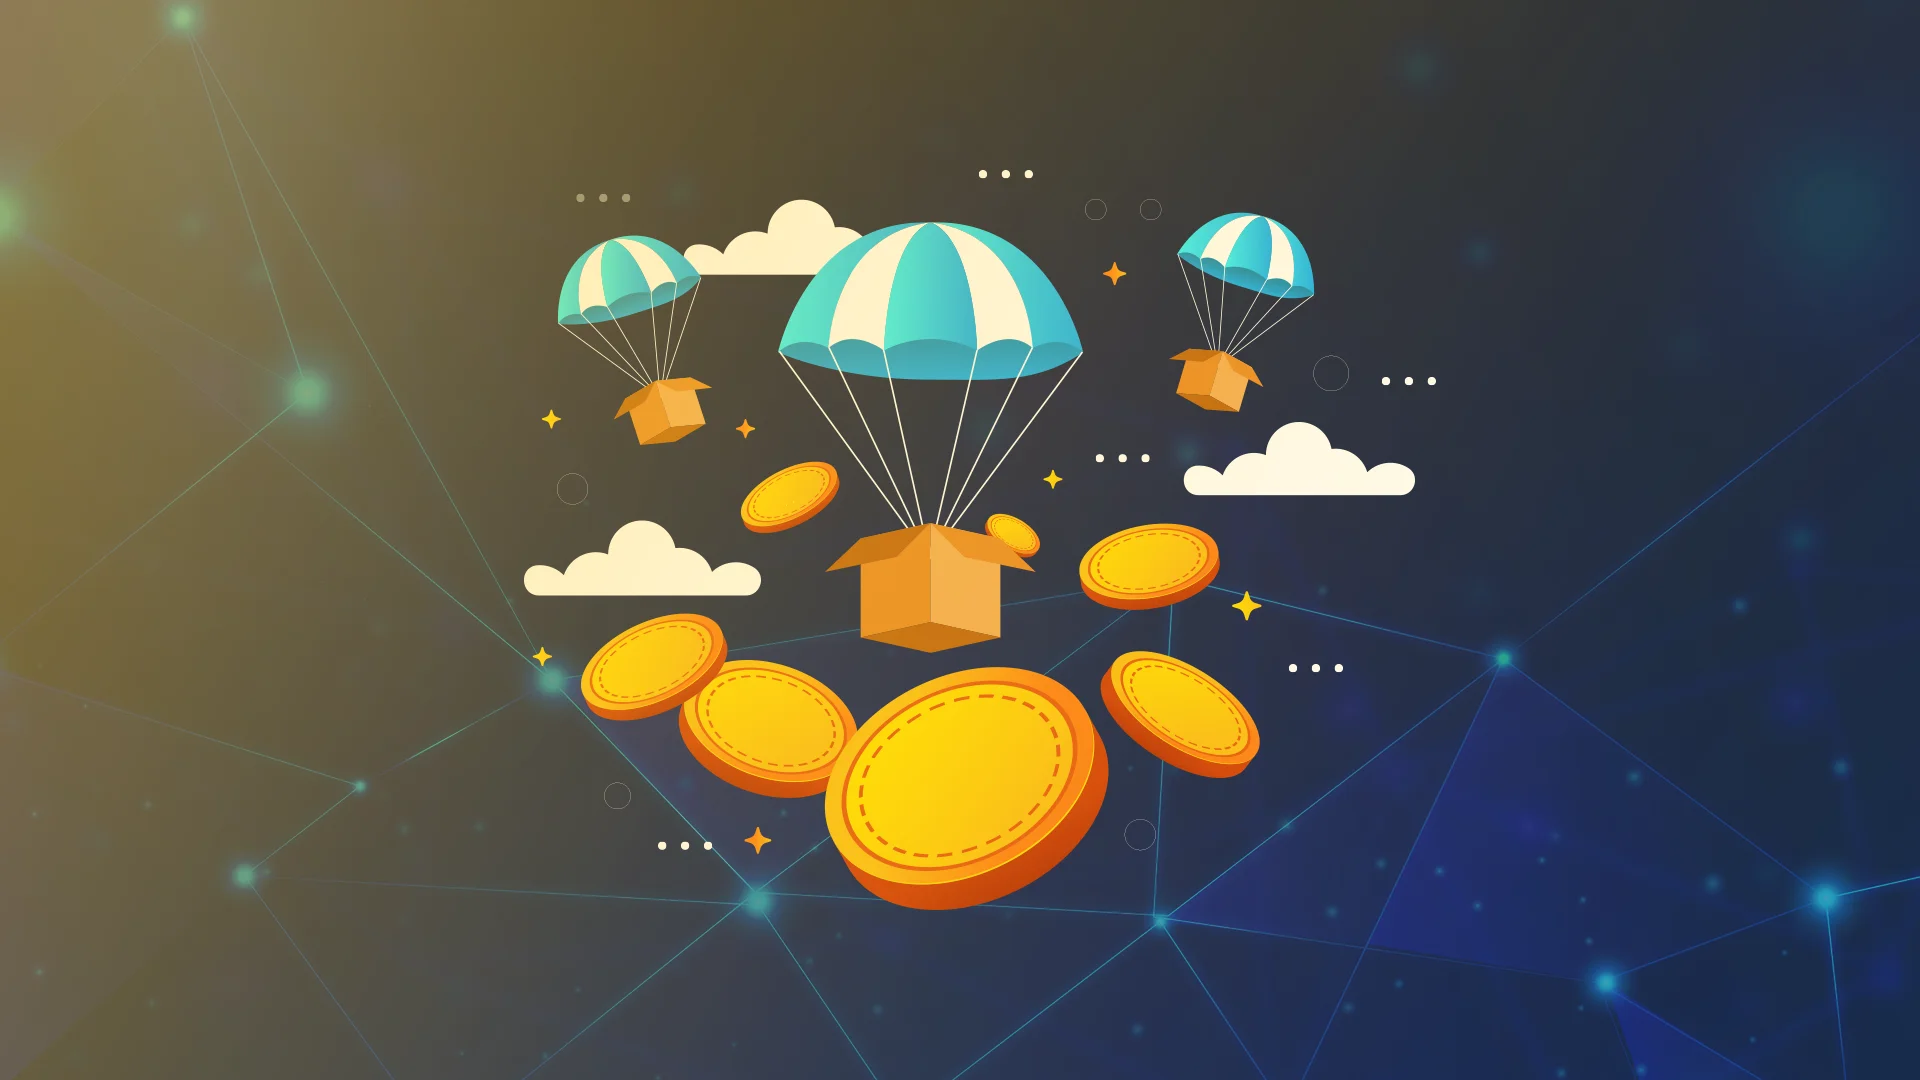 Crypto Airdrops - Get Free Coins (December )